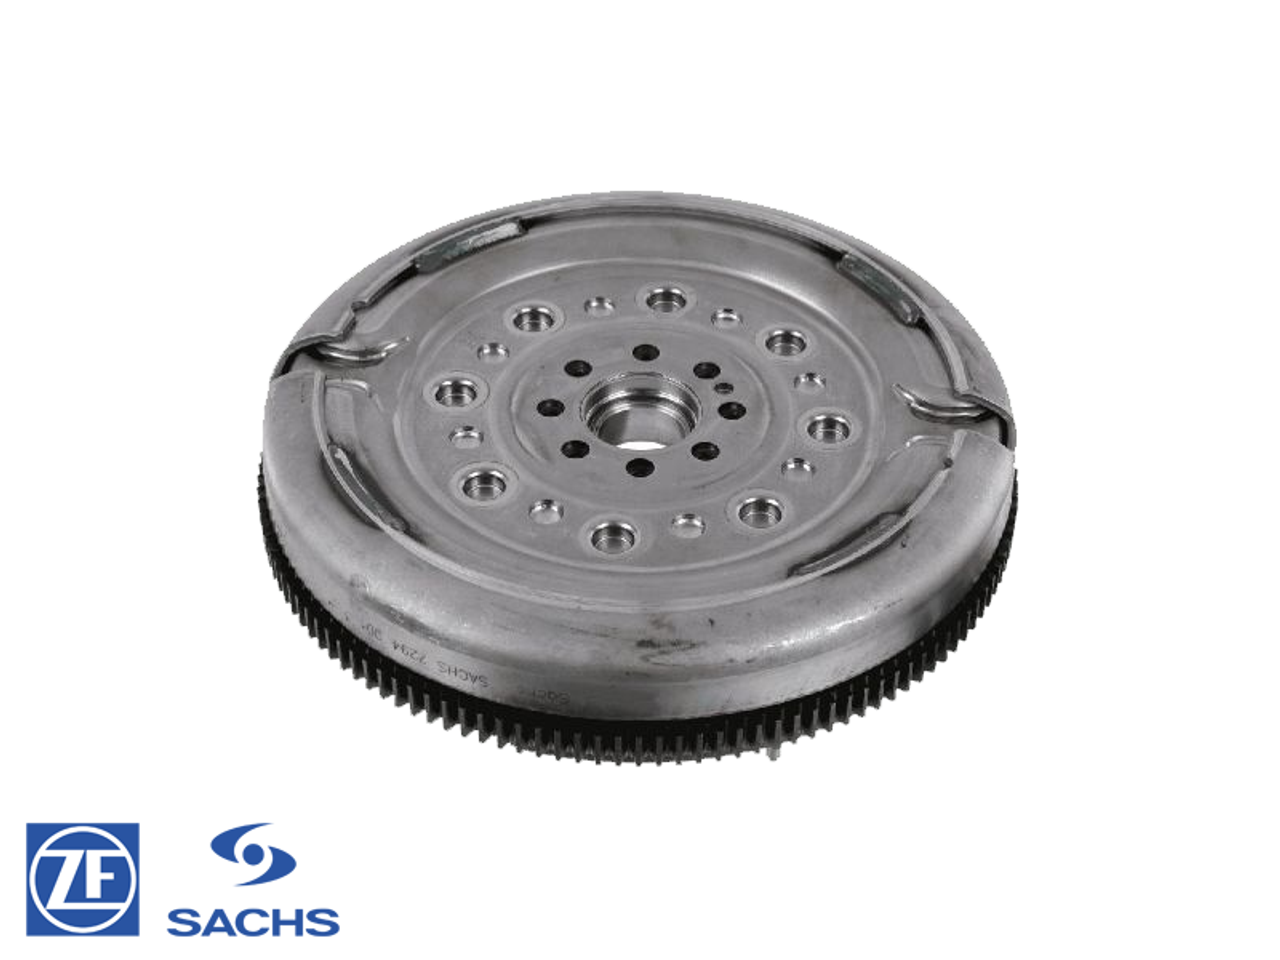 Sachs Dual Mass Flywheel for Volkswagen Golf Mk7 'R', Clubsport and TCR